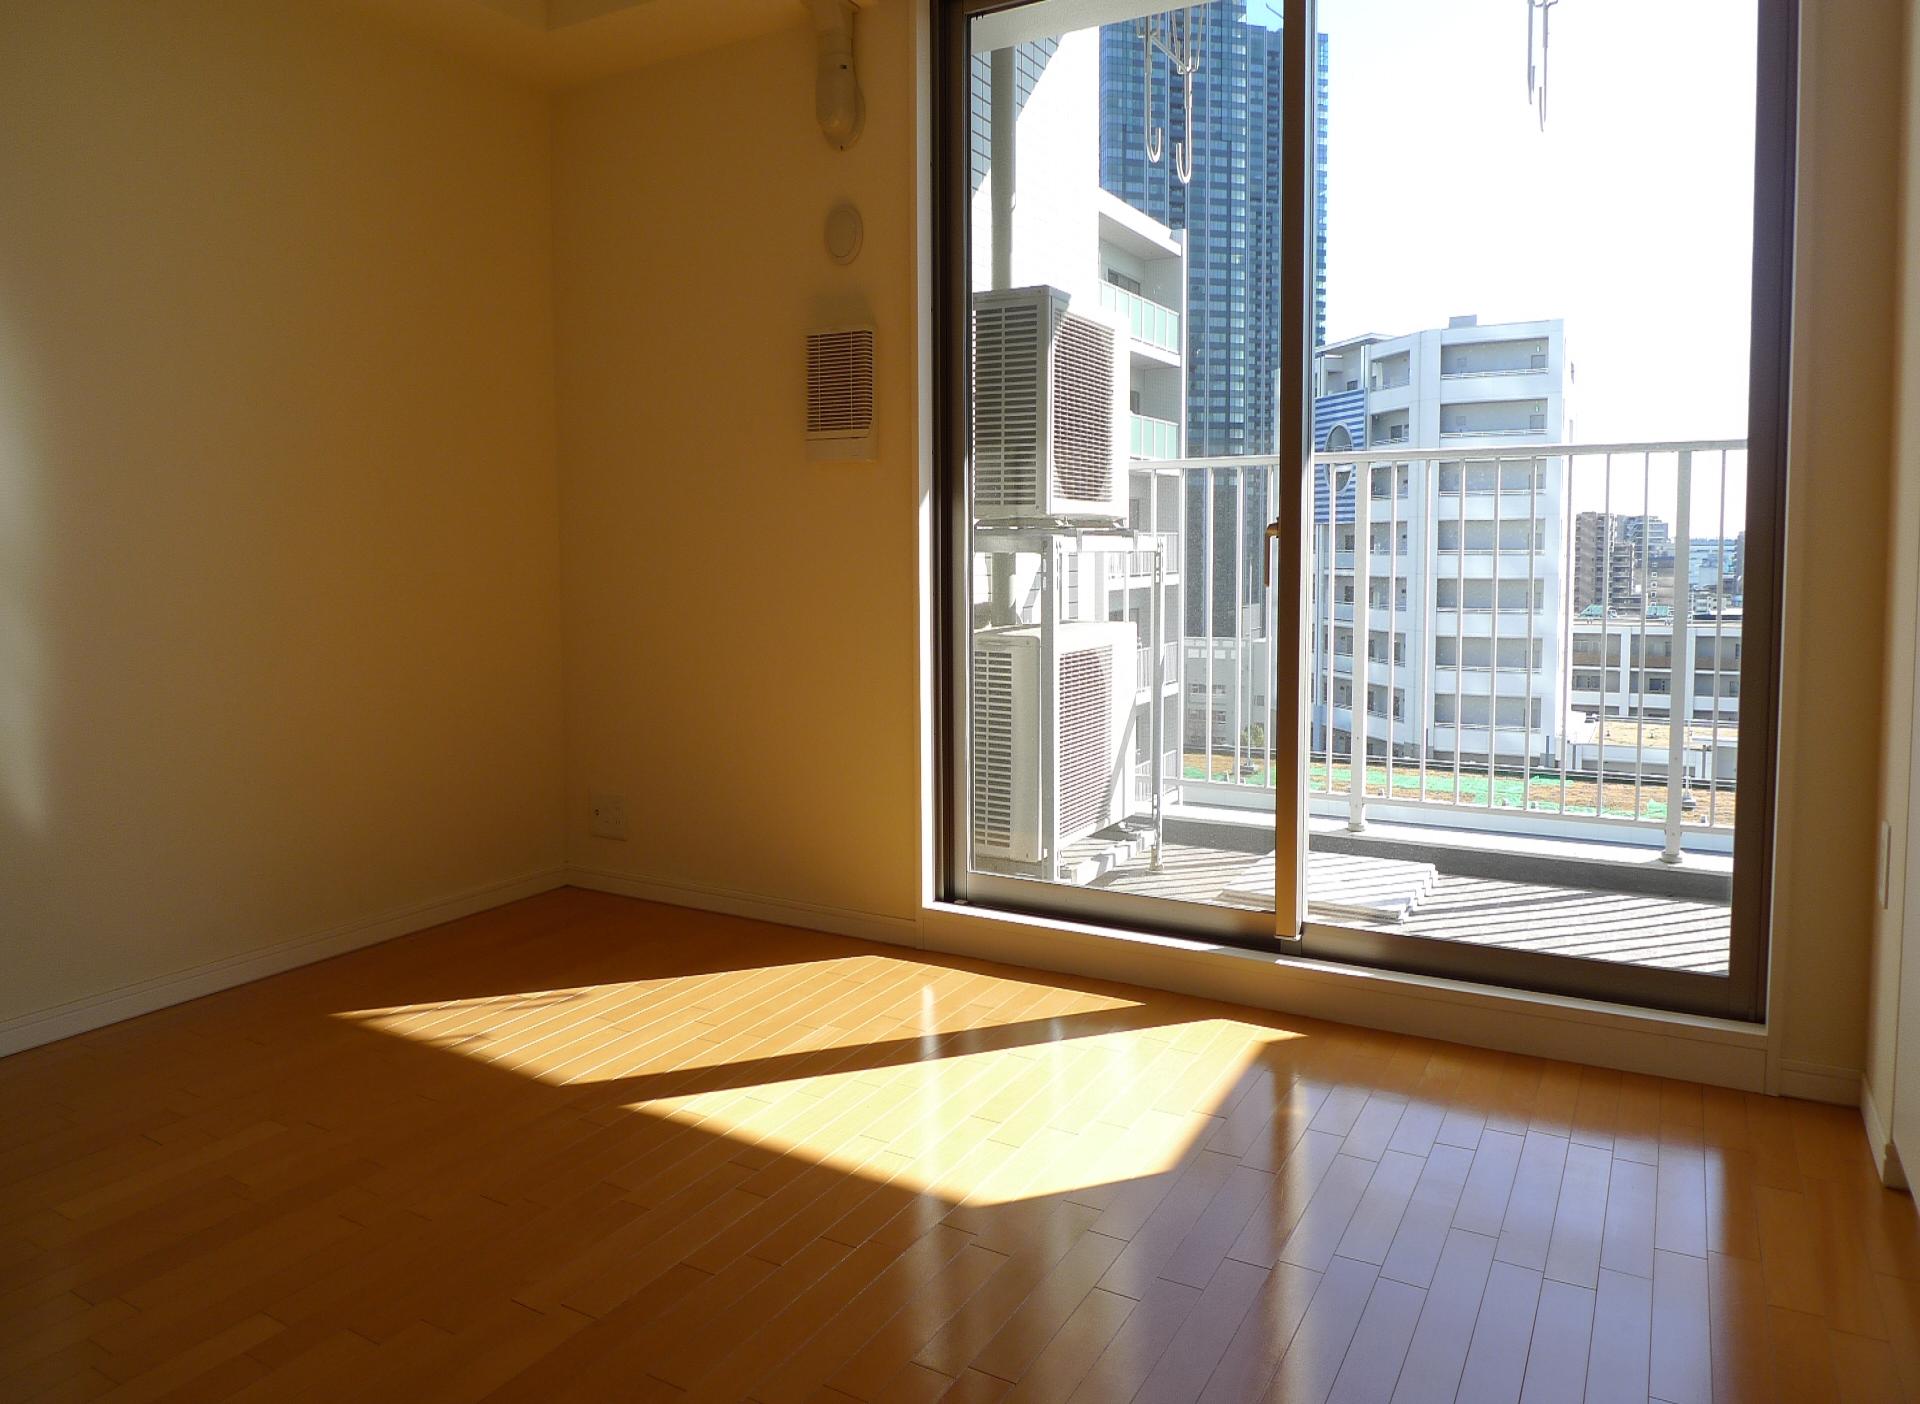 Living and room. Brokerage fee 0 key money 0 preview local pet. Close to pool ・ Gym ・ LaLaport